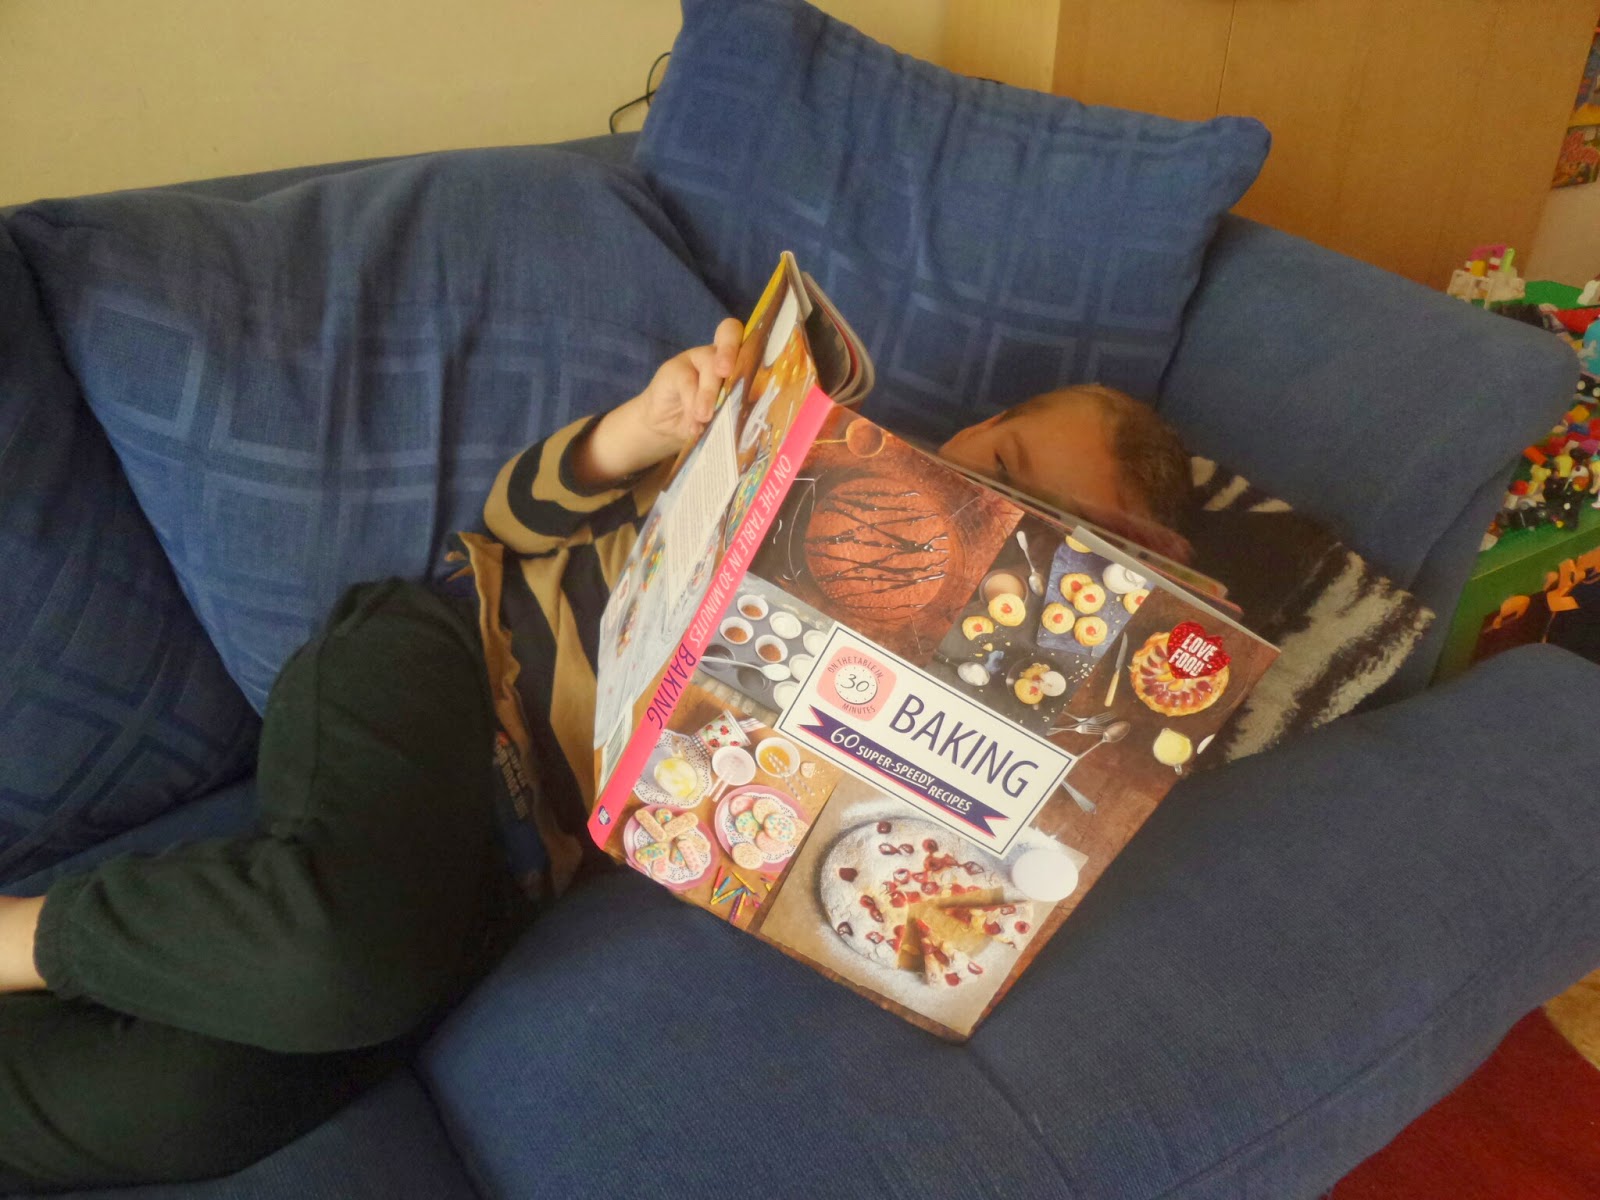 Big Boy reading On The Table in 30: Baking - Parragon Book #Review